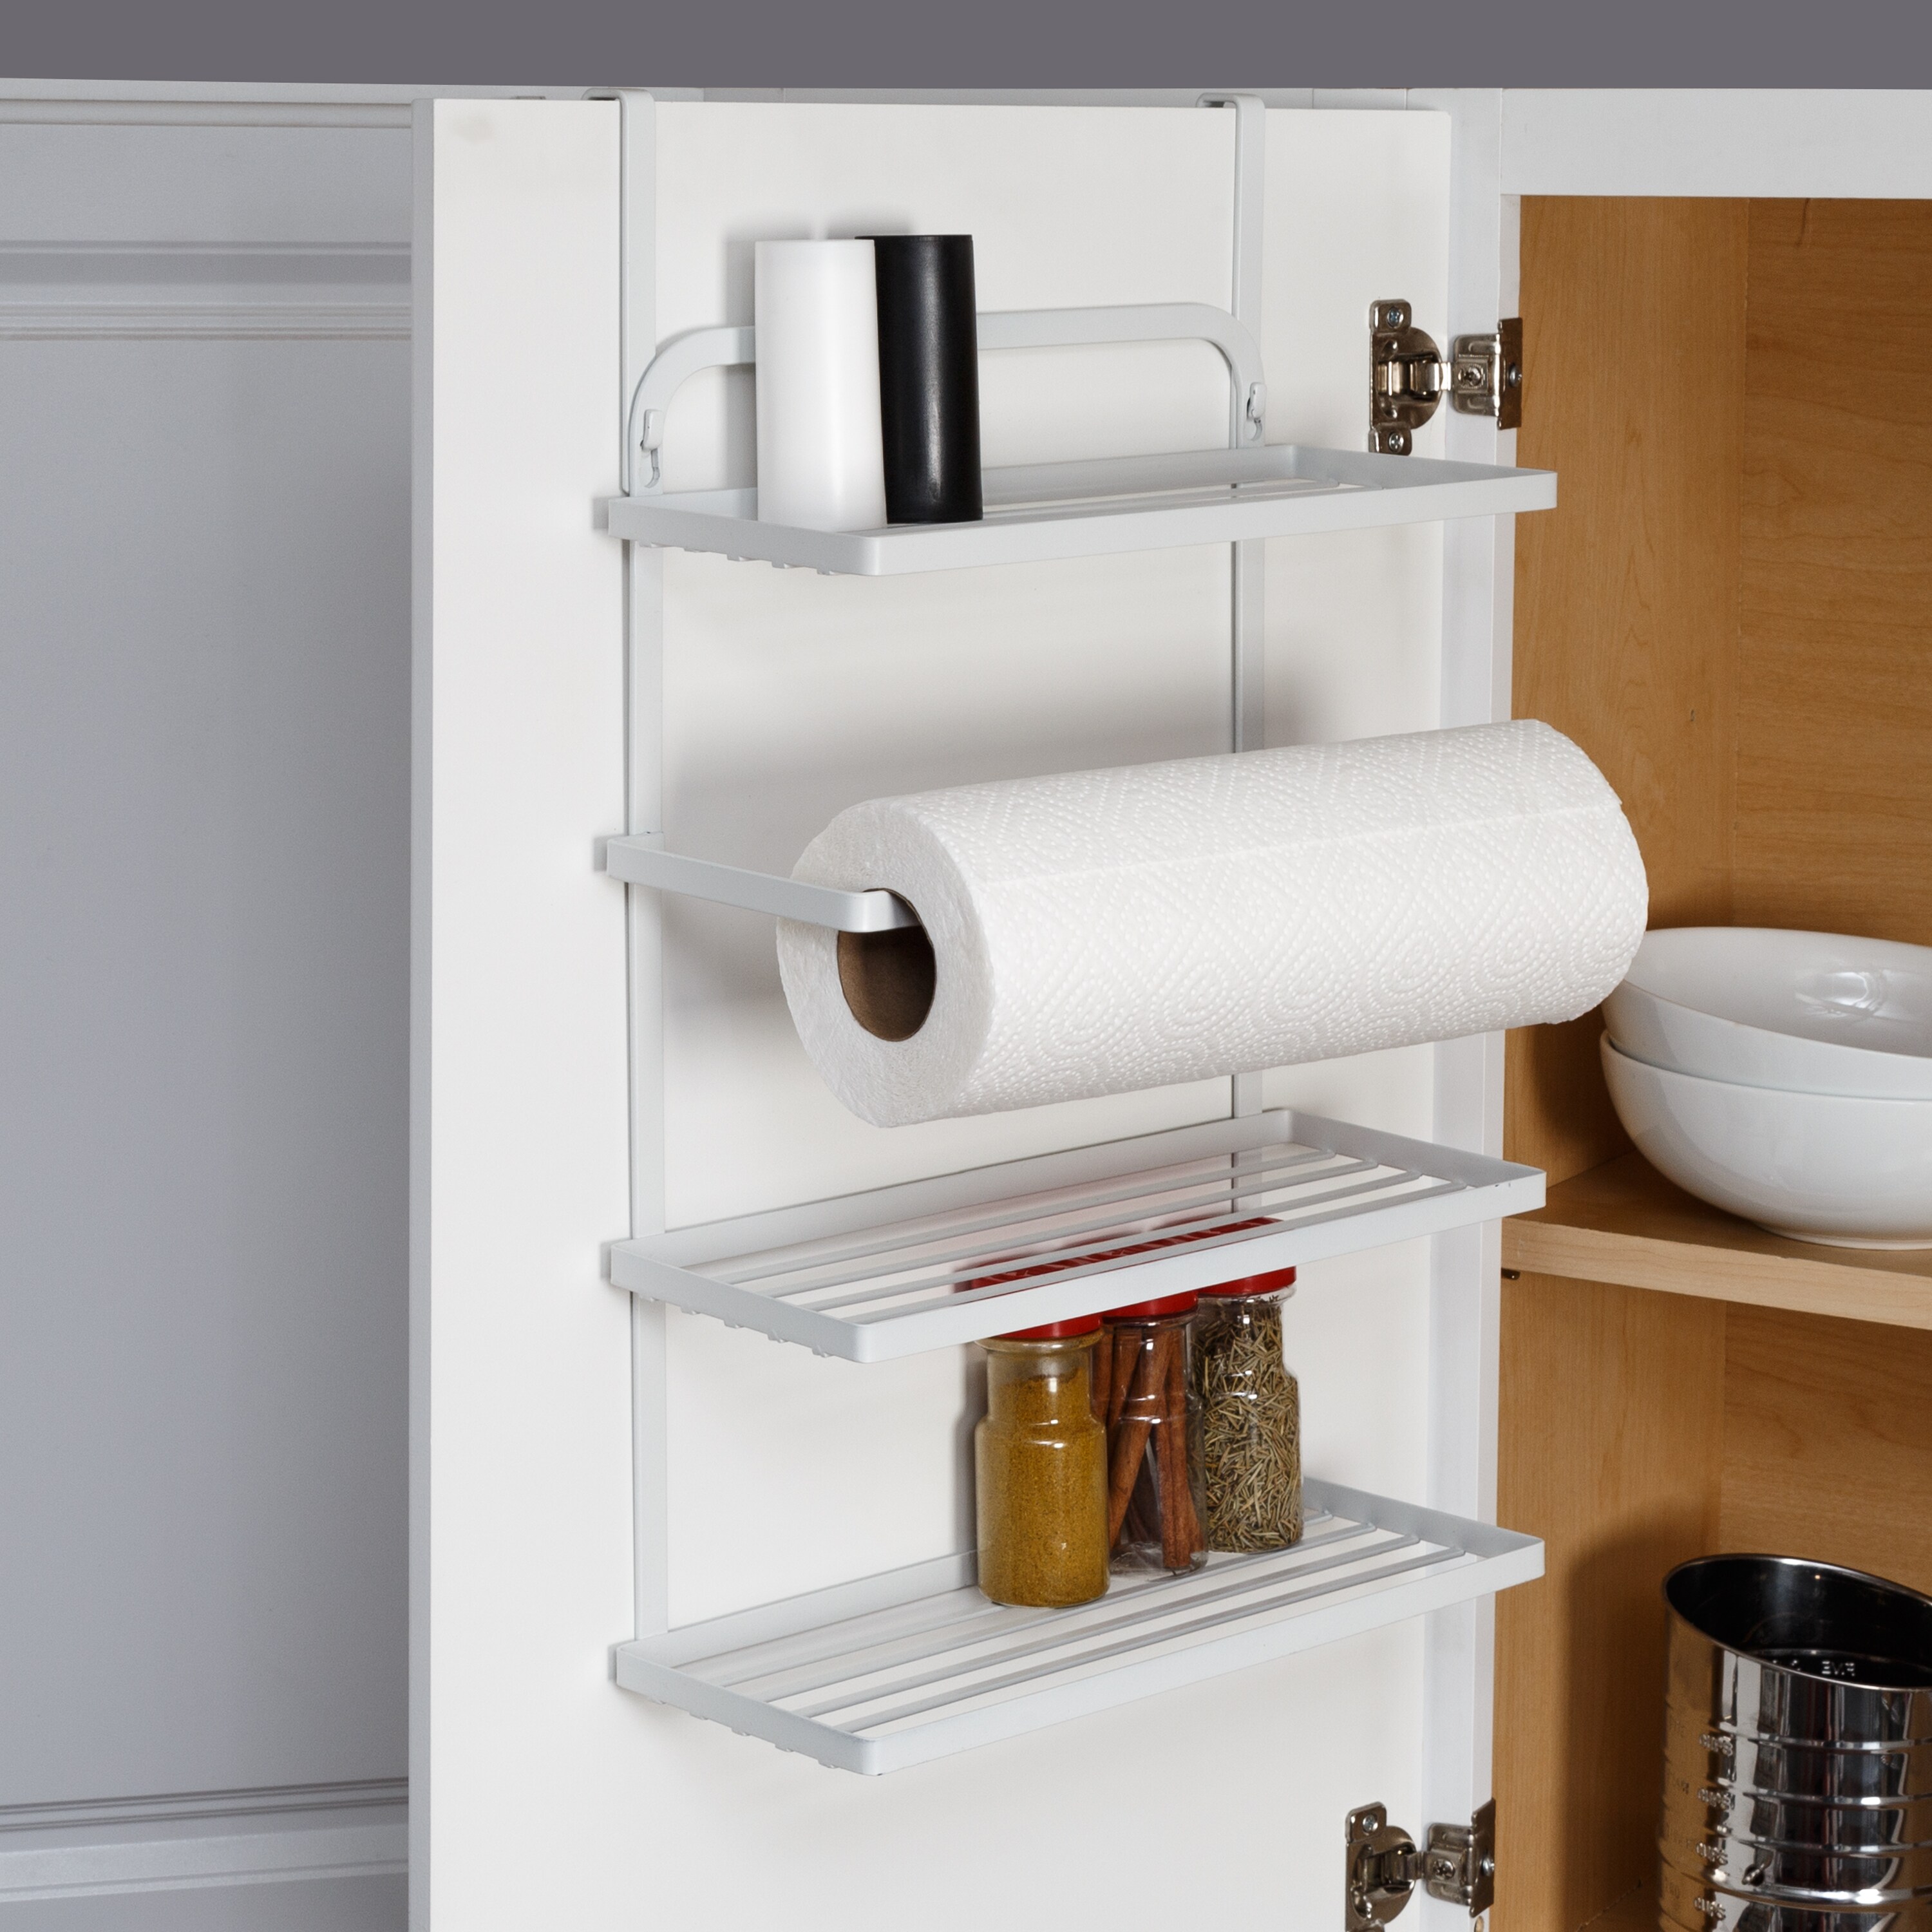 Fancy Style paper towel holder - under cabinet or wall mount